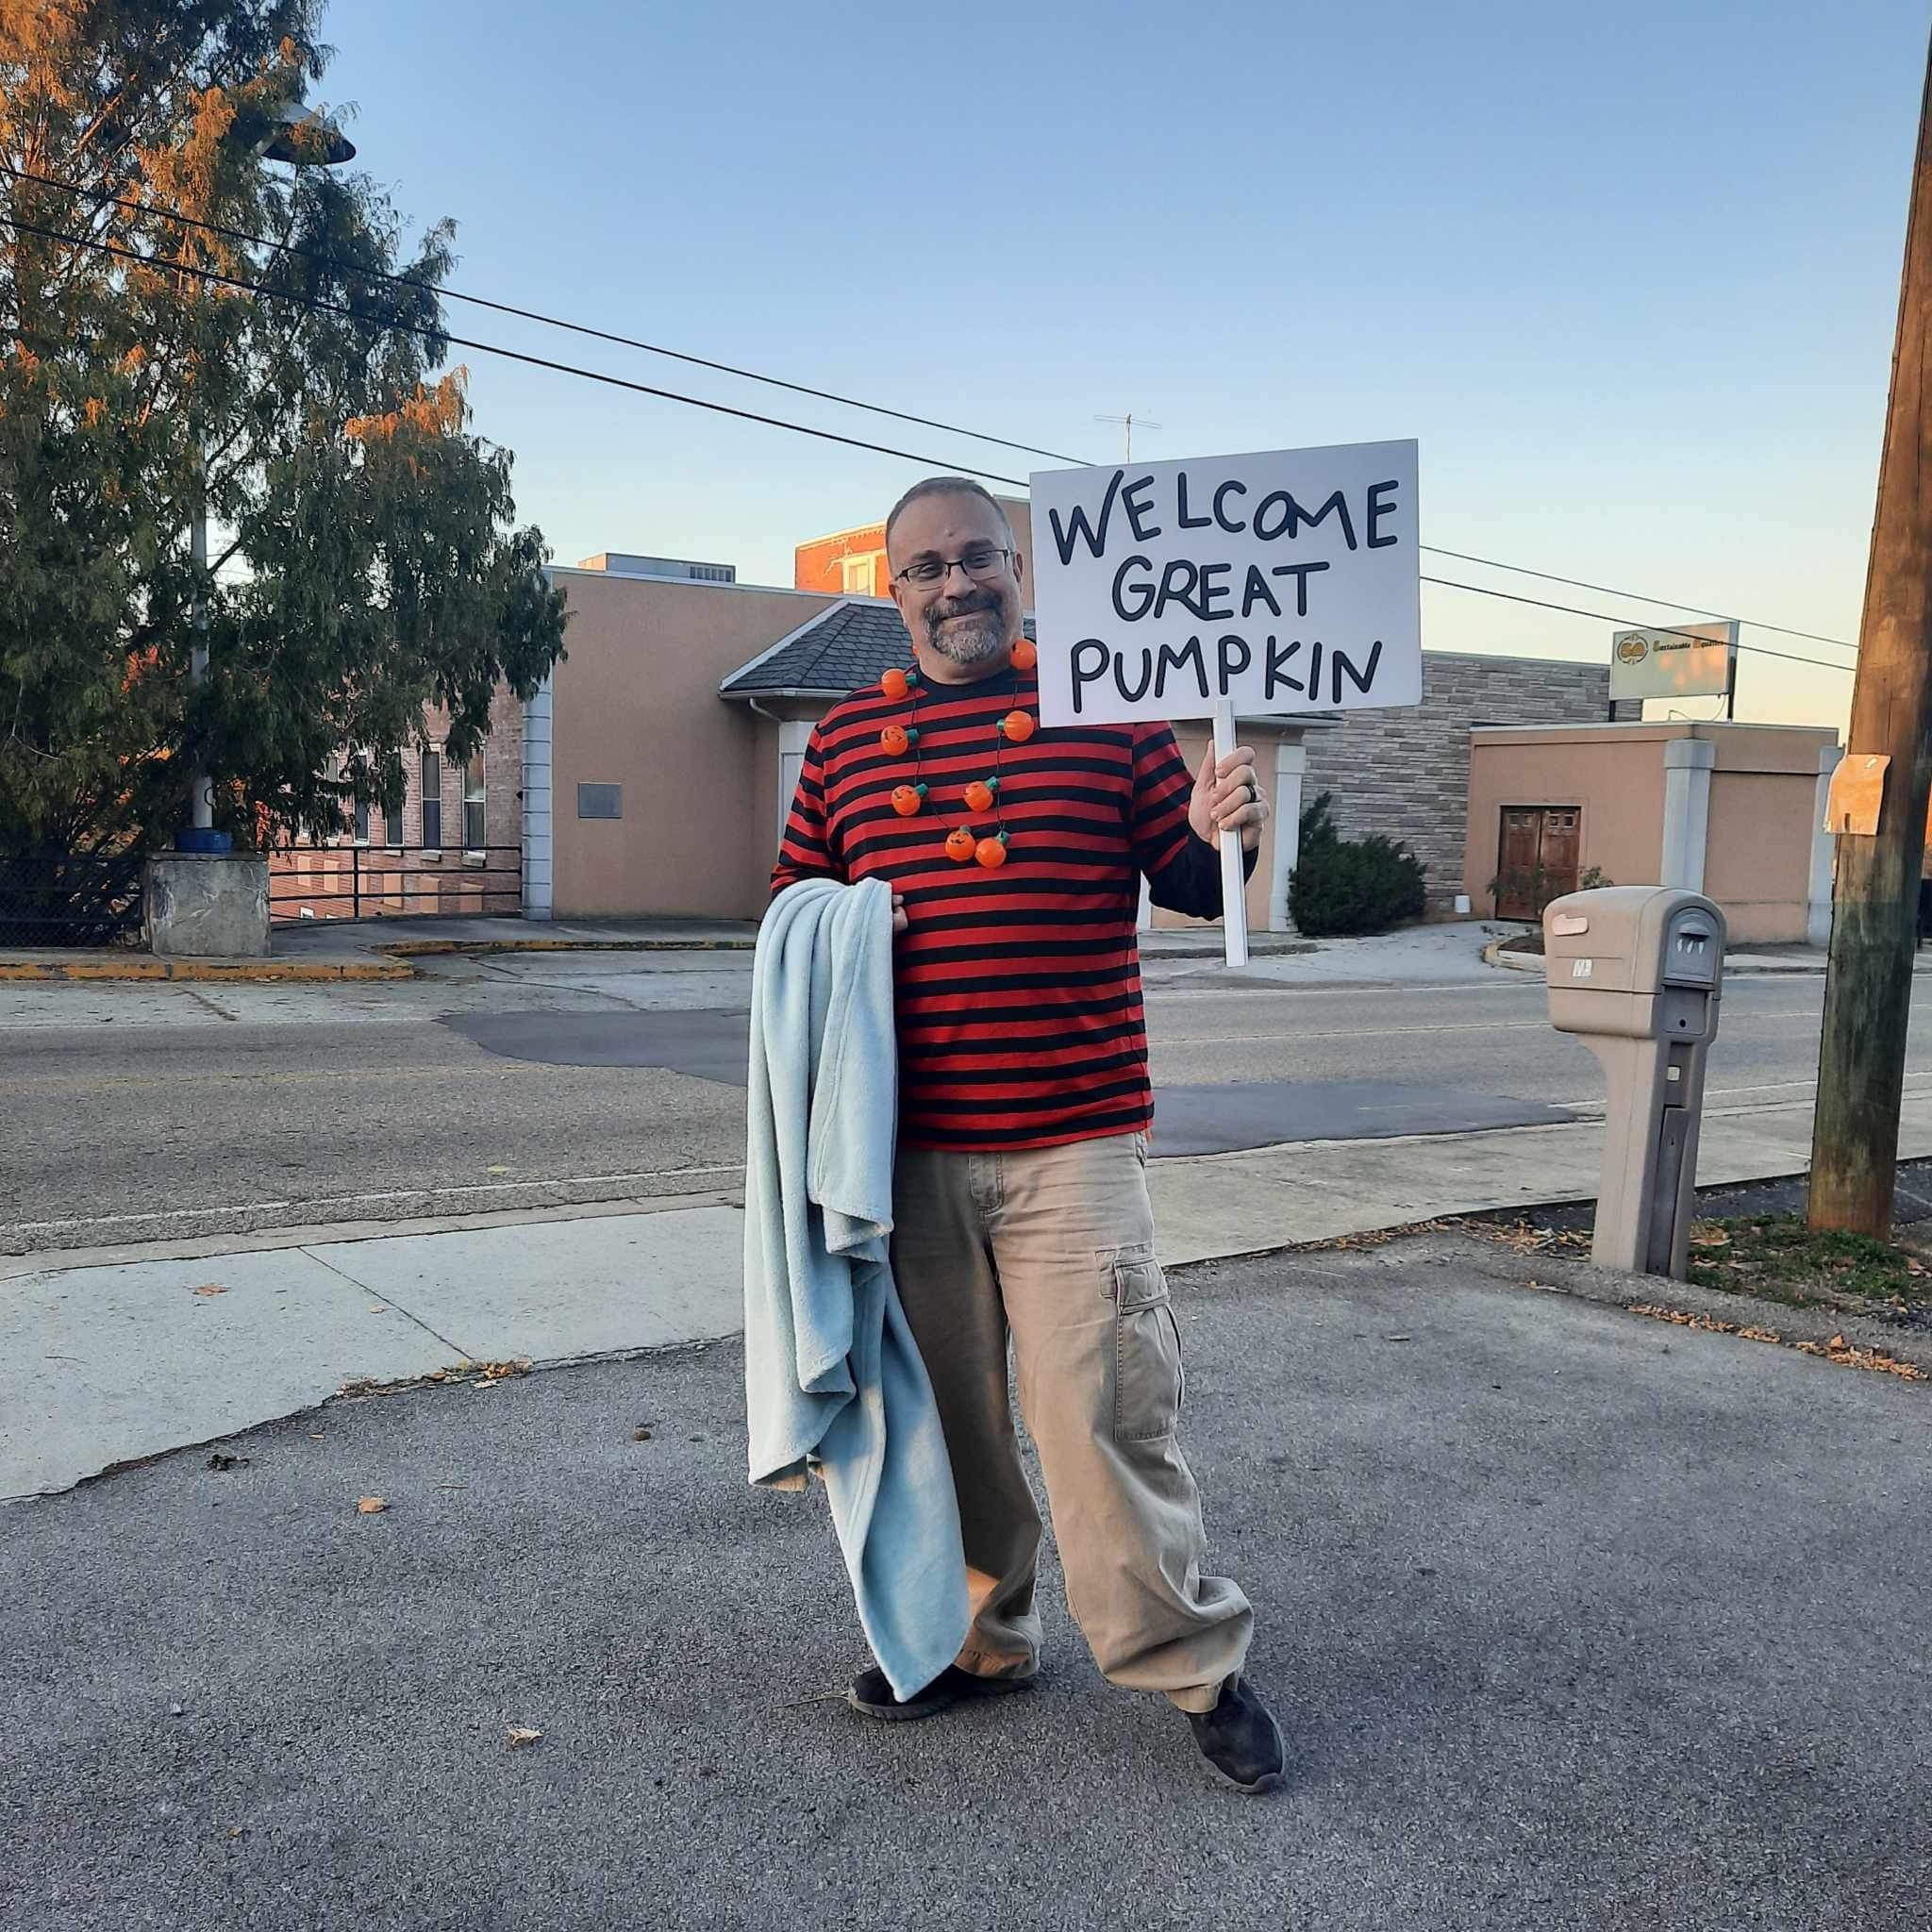 I had fun doing this, we set up at a local small business near us. I waved at drivers passing by and holding my Welcome Great Pumpkin sign. We did have a good turnout with only a few cars set up. But they did have things inside for the family.  (Linus of The Great Pumpkin) 